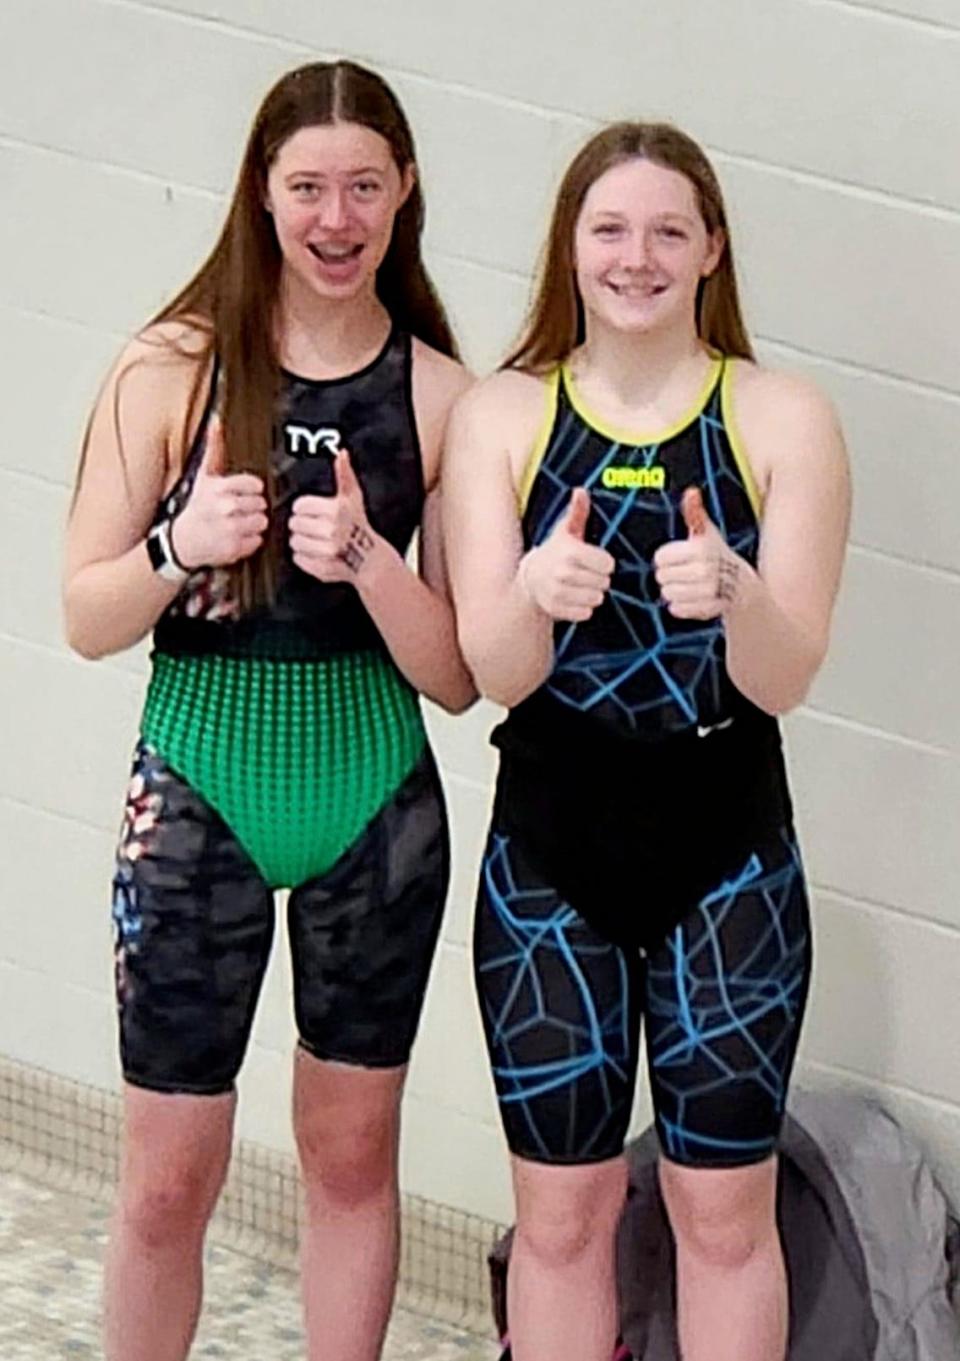 Both Ainsley Gump and Kaylee Draper took time out for a thumbs-up at the Zones Championships in Ohio.